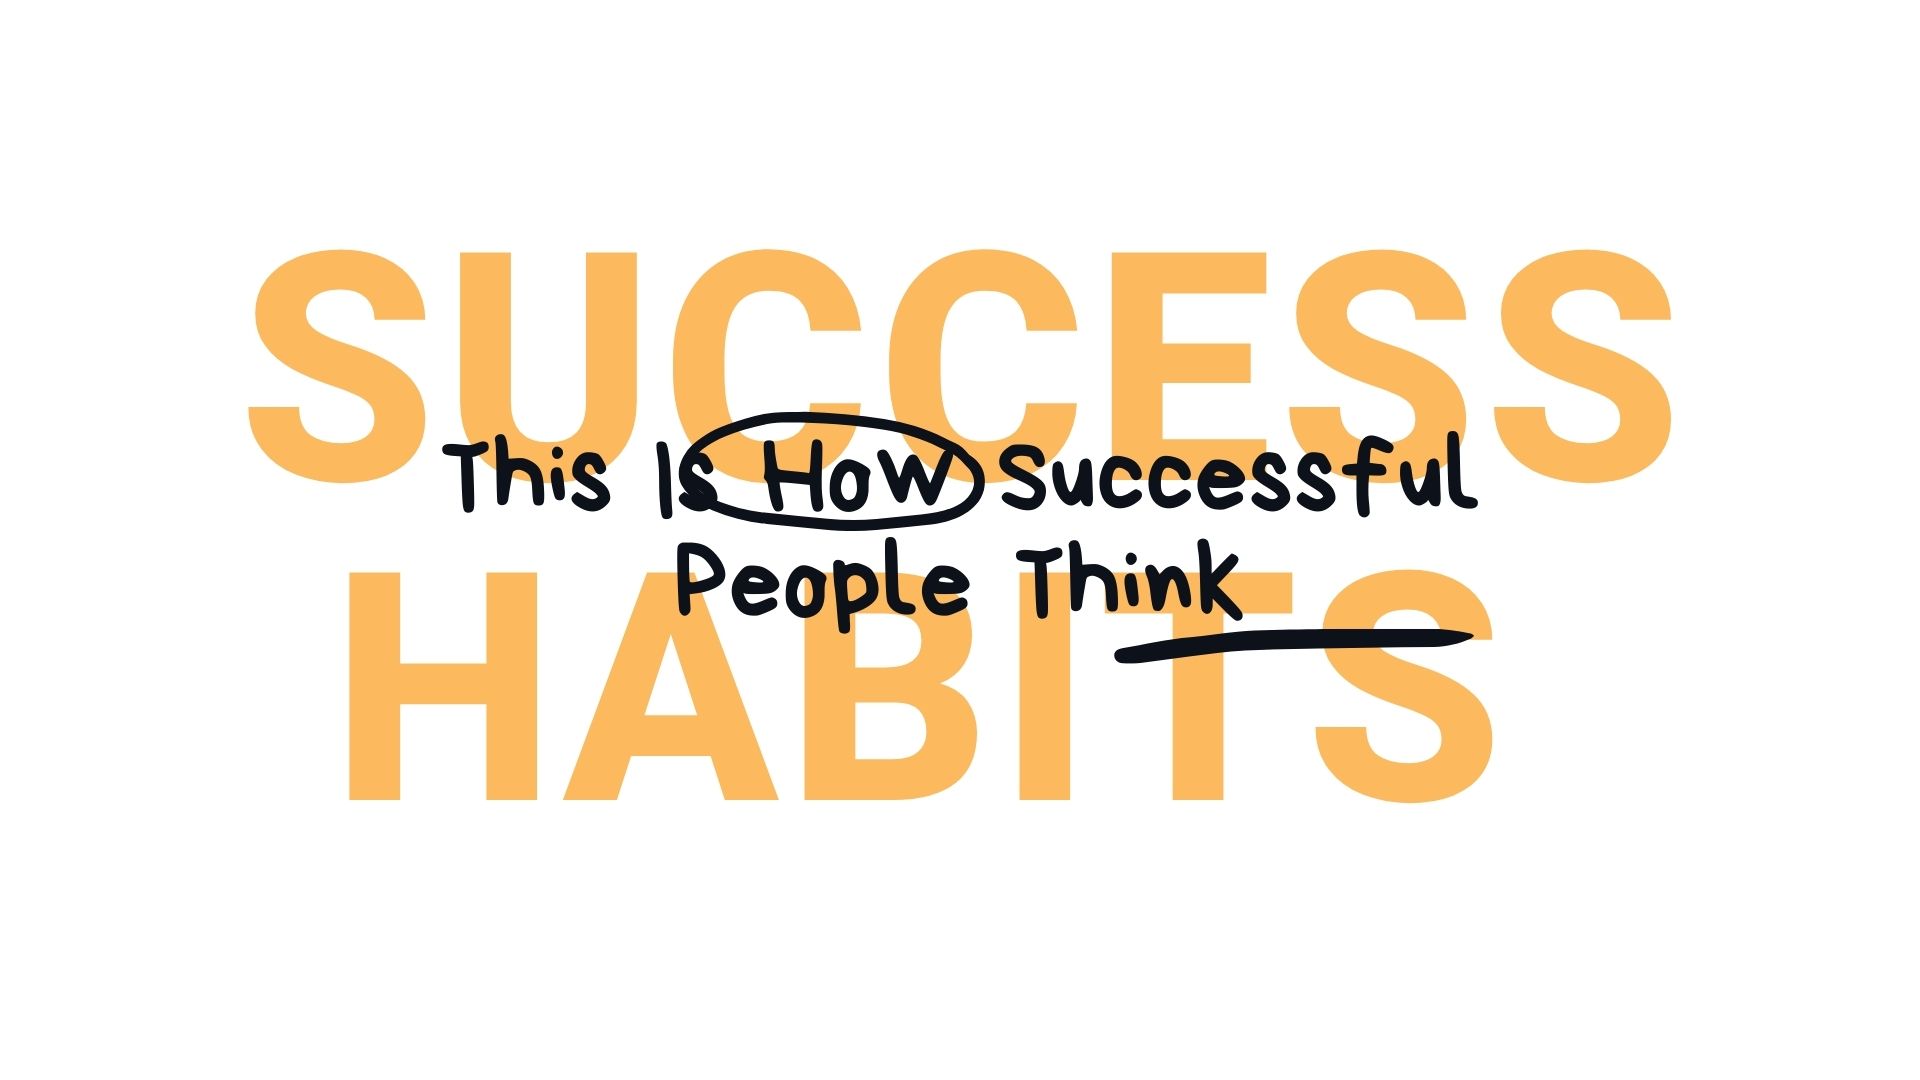 How-To-Successful-People-Think